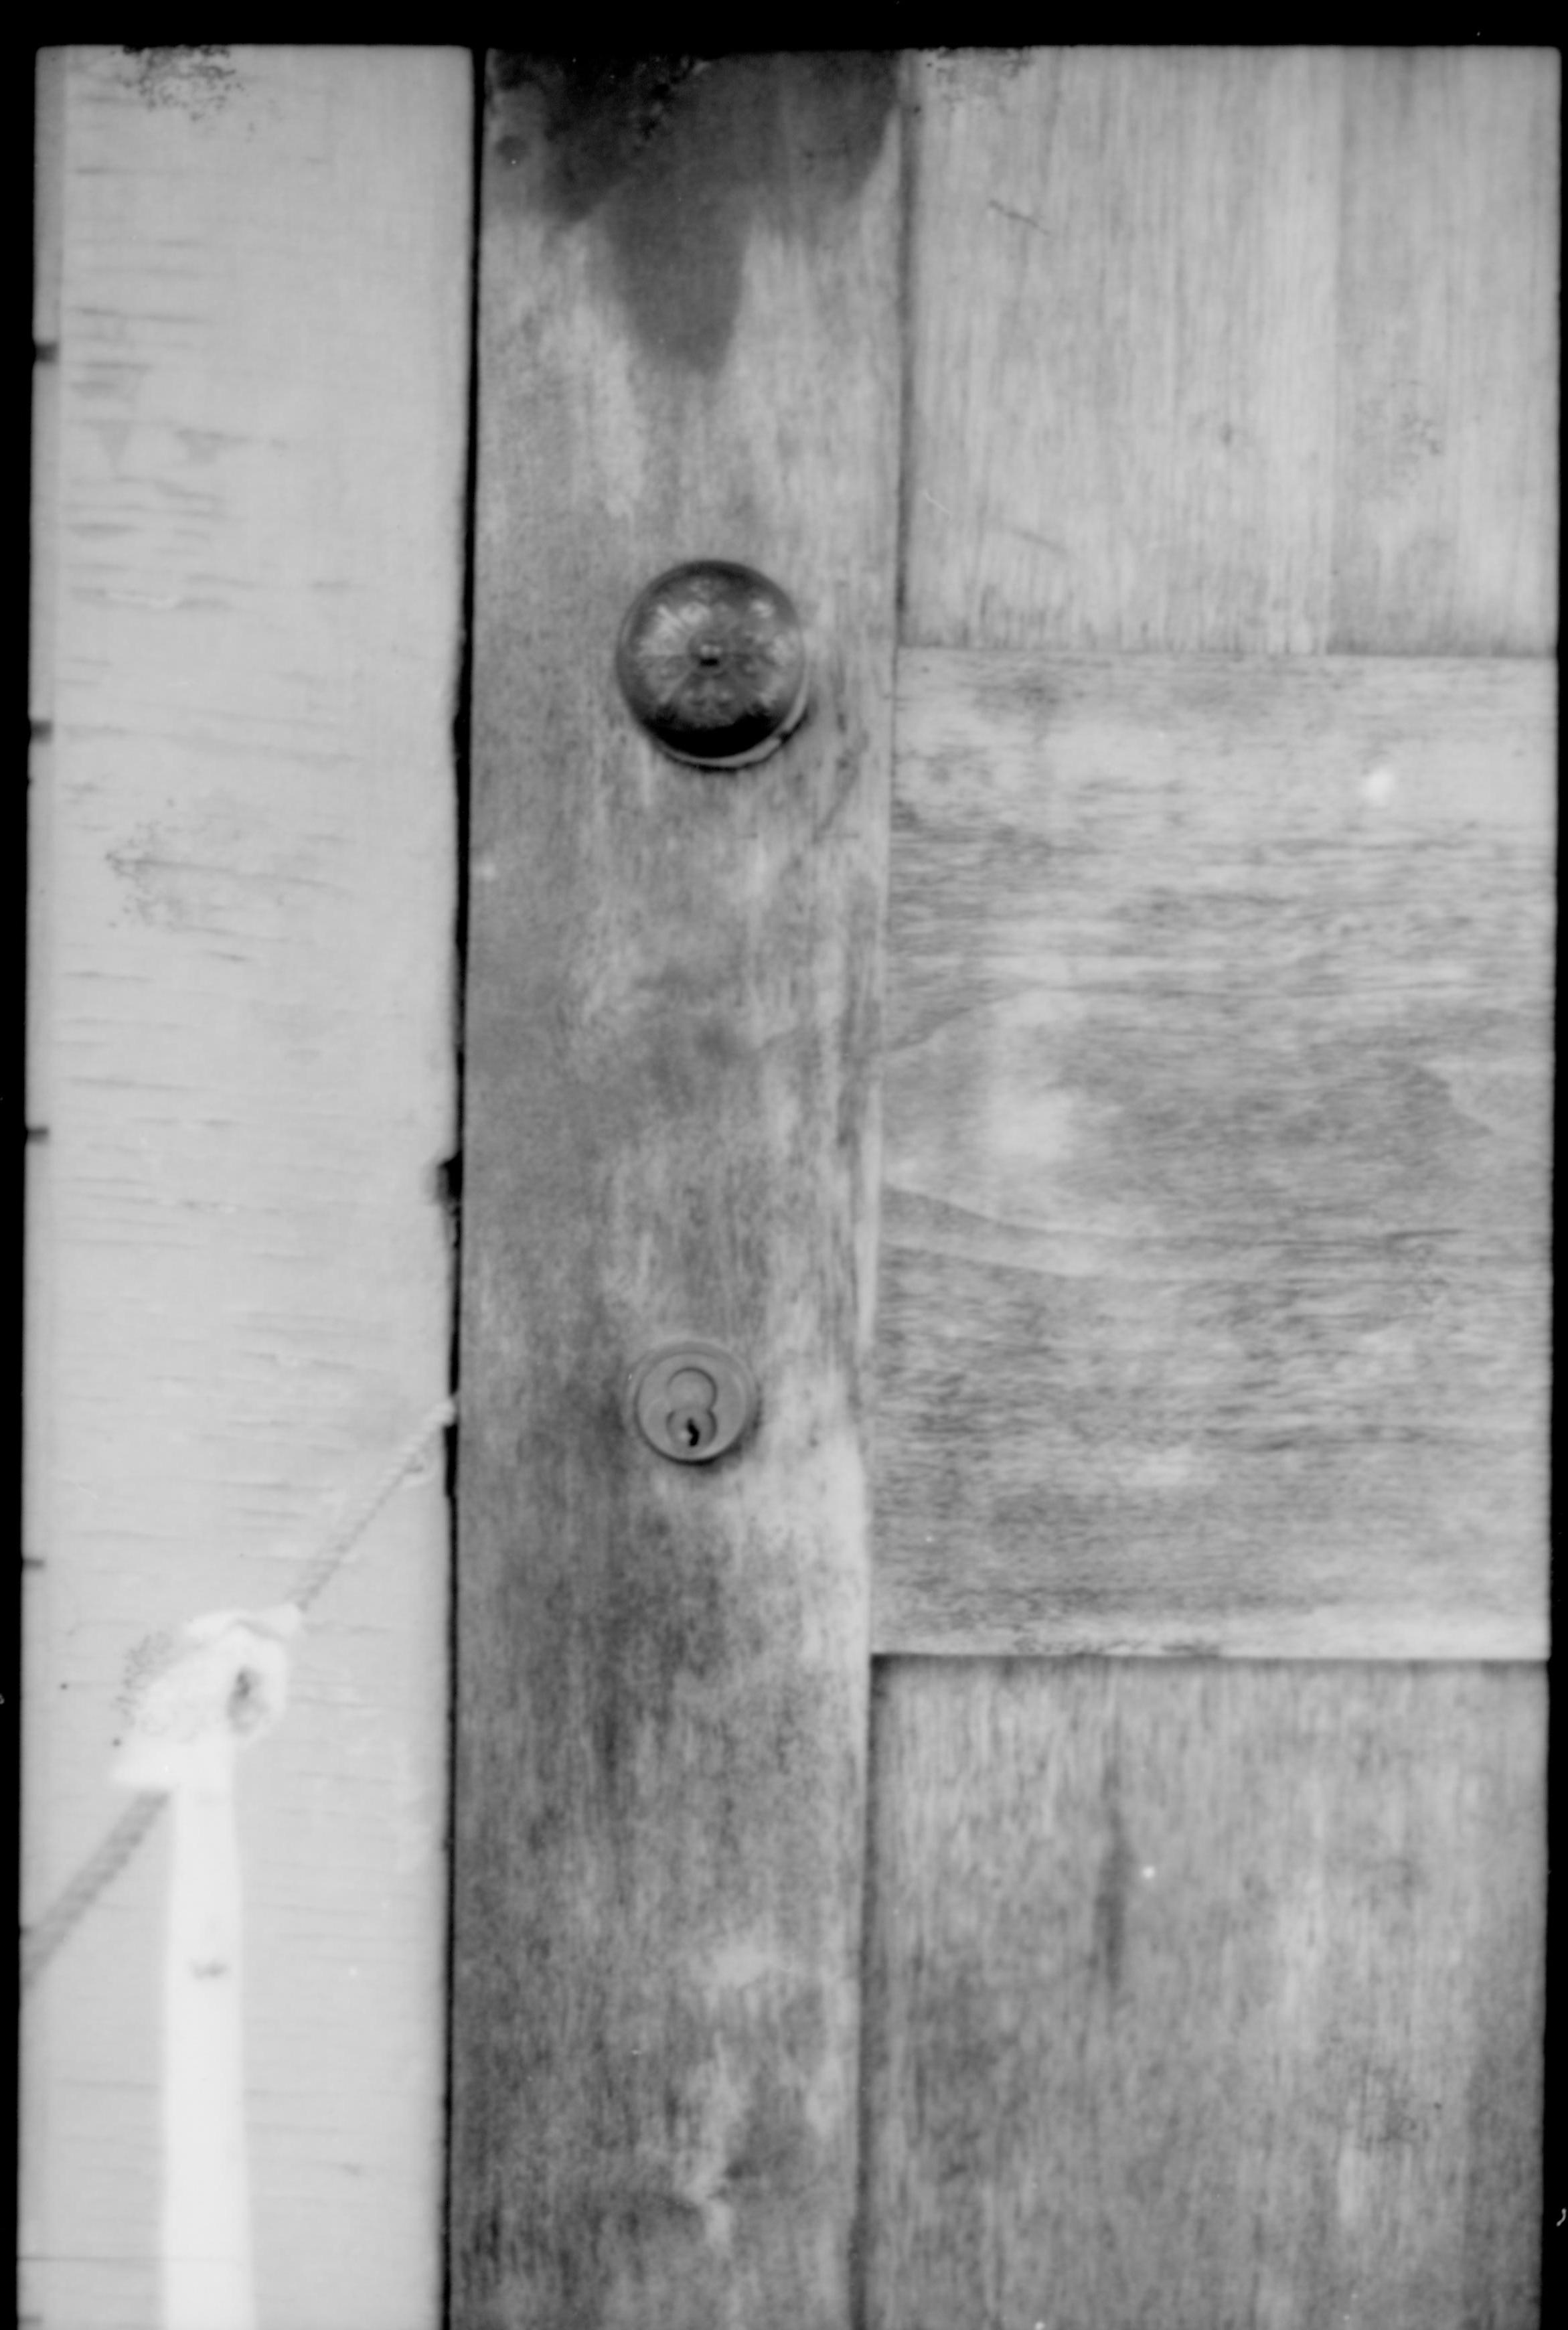 A close up picture of a doorknob and keyhole.